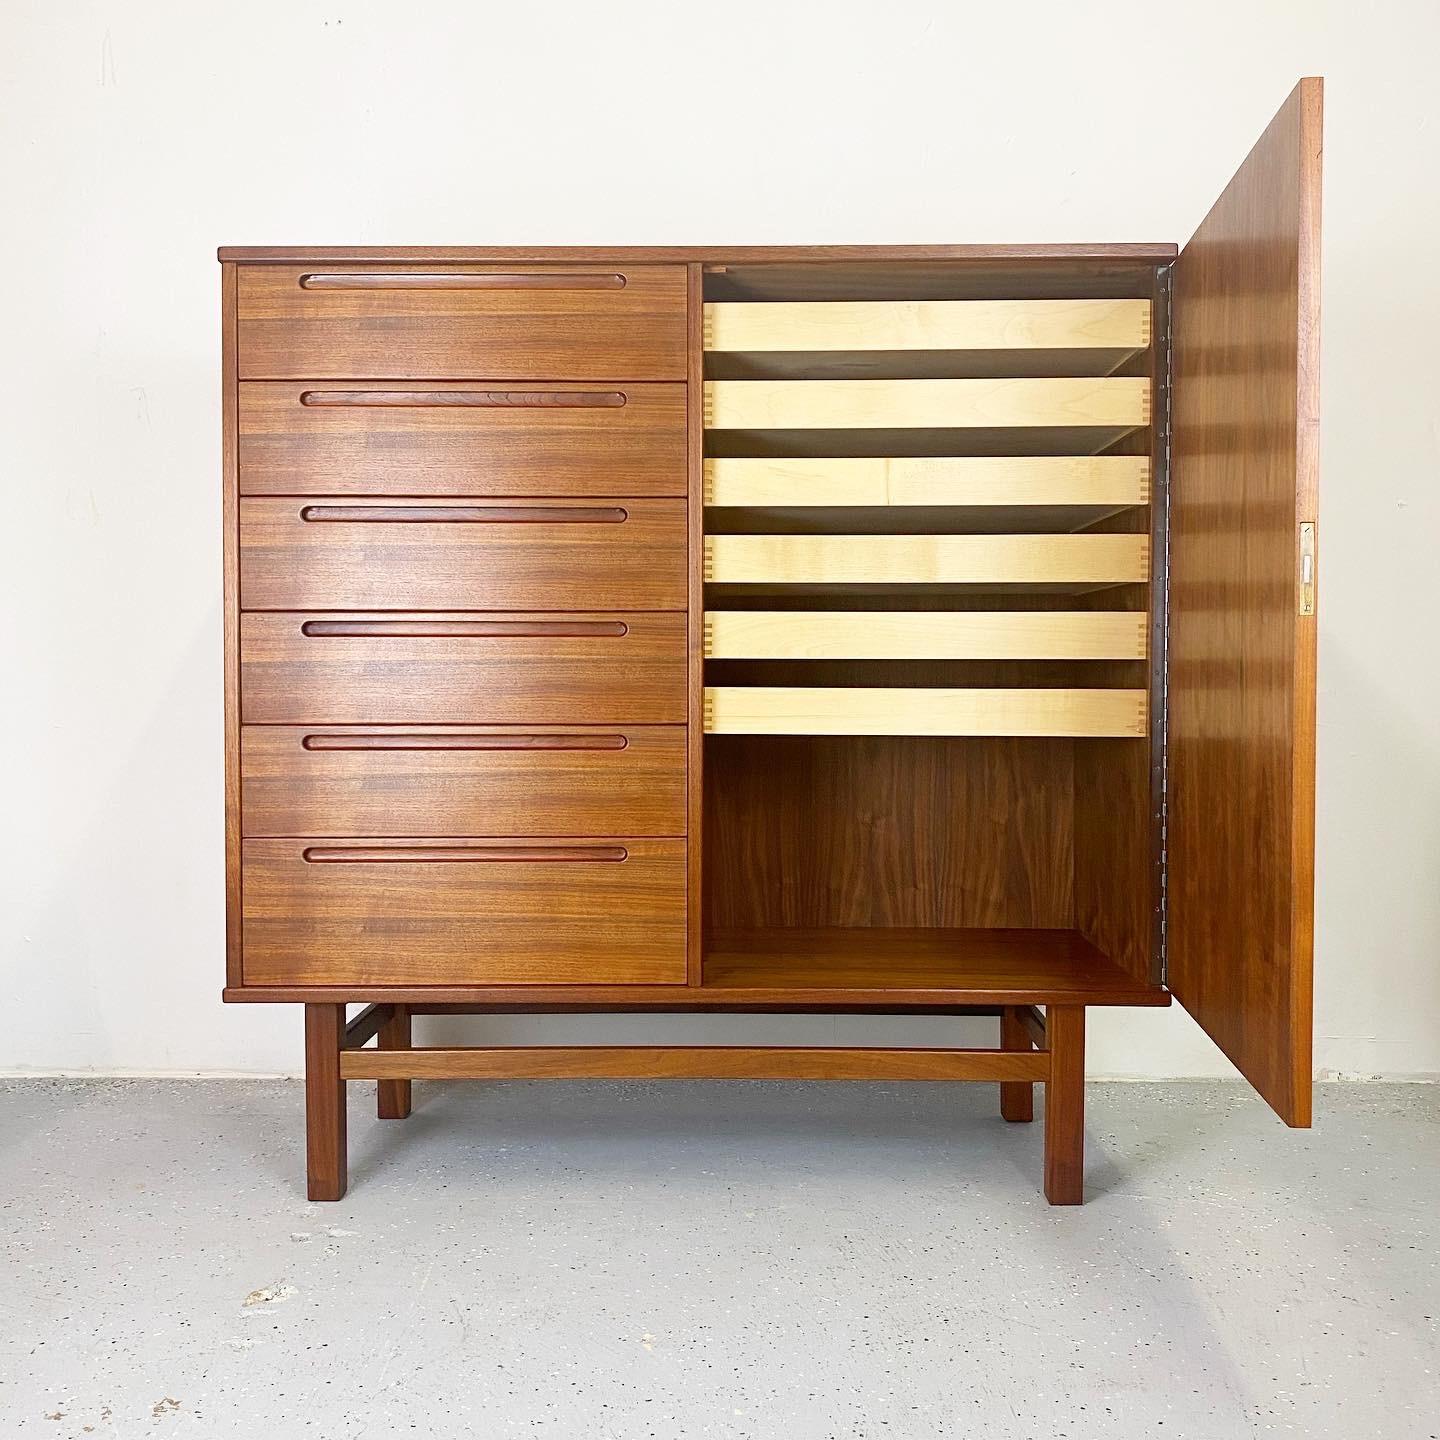 Incredible oiled teak chest by Nils Jonsson with six drawers and a door concealing six smaller birch drawers. Wonderful minimalist design with a plethora of storage.